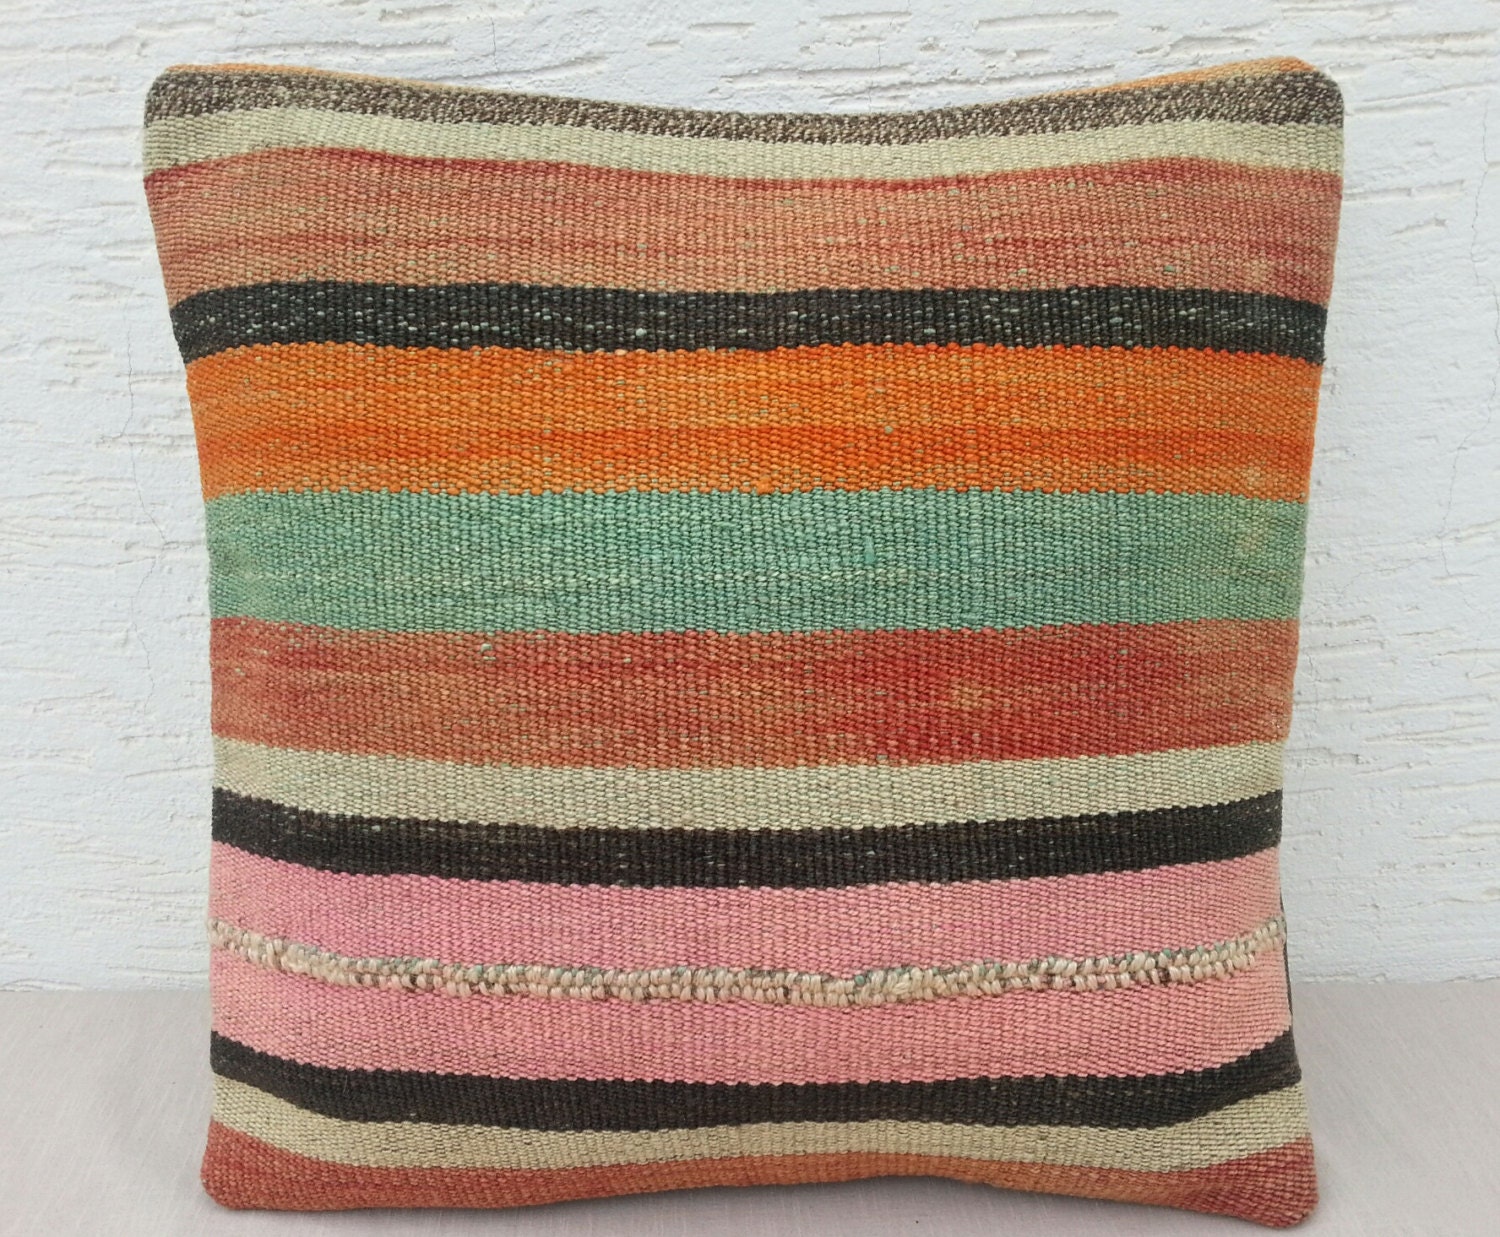 20x20  STRIPED Stripe Large Pink Orange Green Color Body Kilim Pillow Cover,Large Floor Cushions,Large Shine Society Wool Sofa Kilim Pillows - pillowsstore